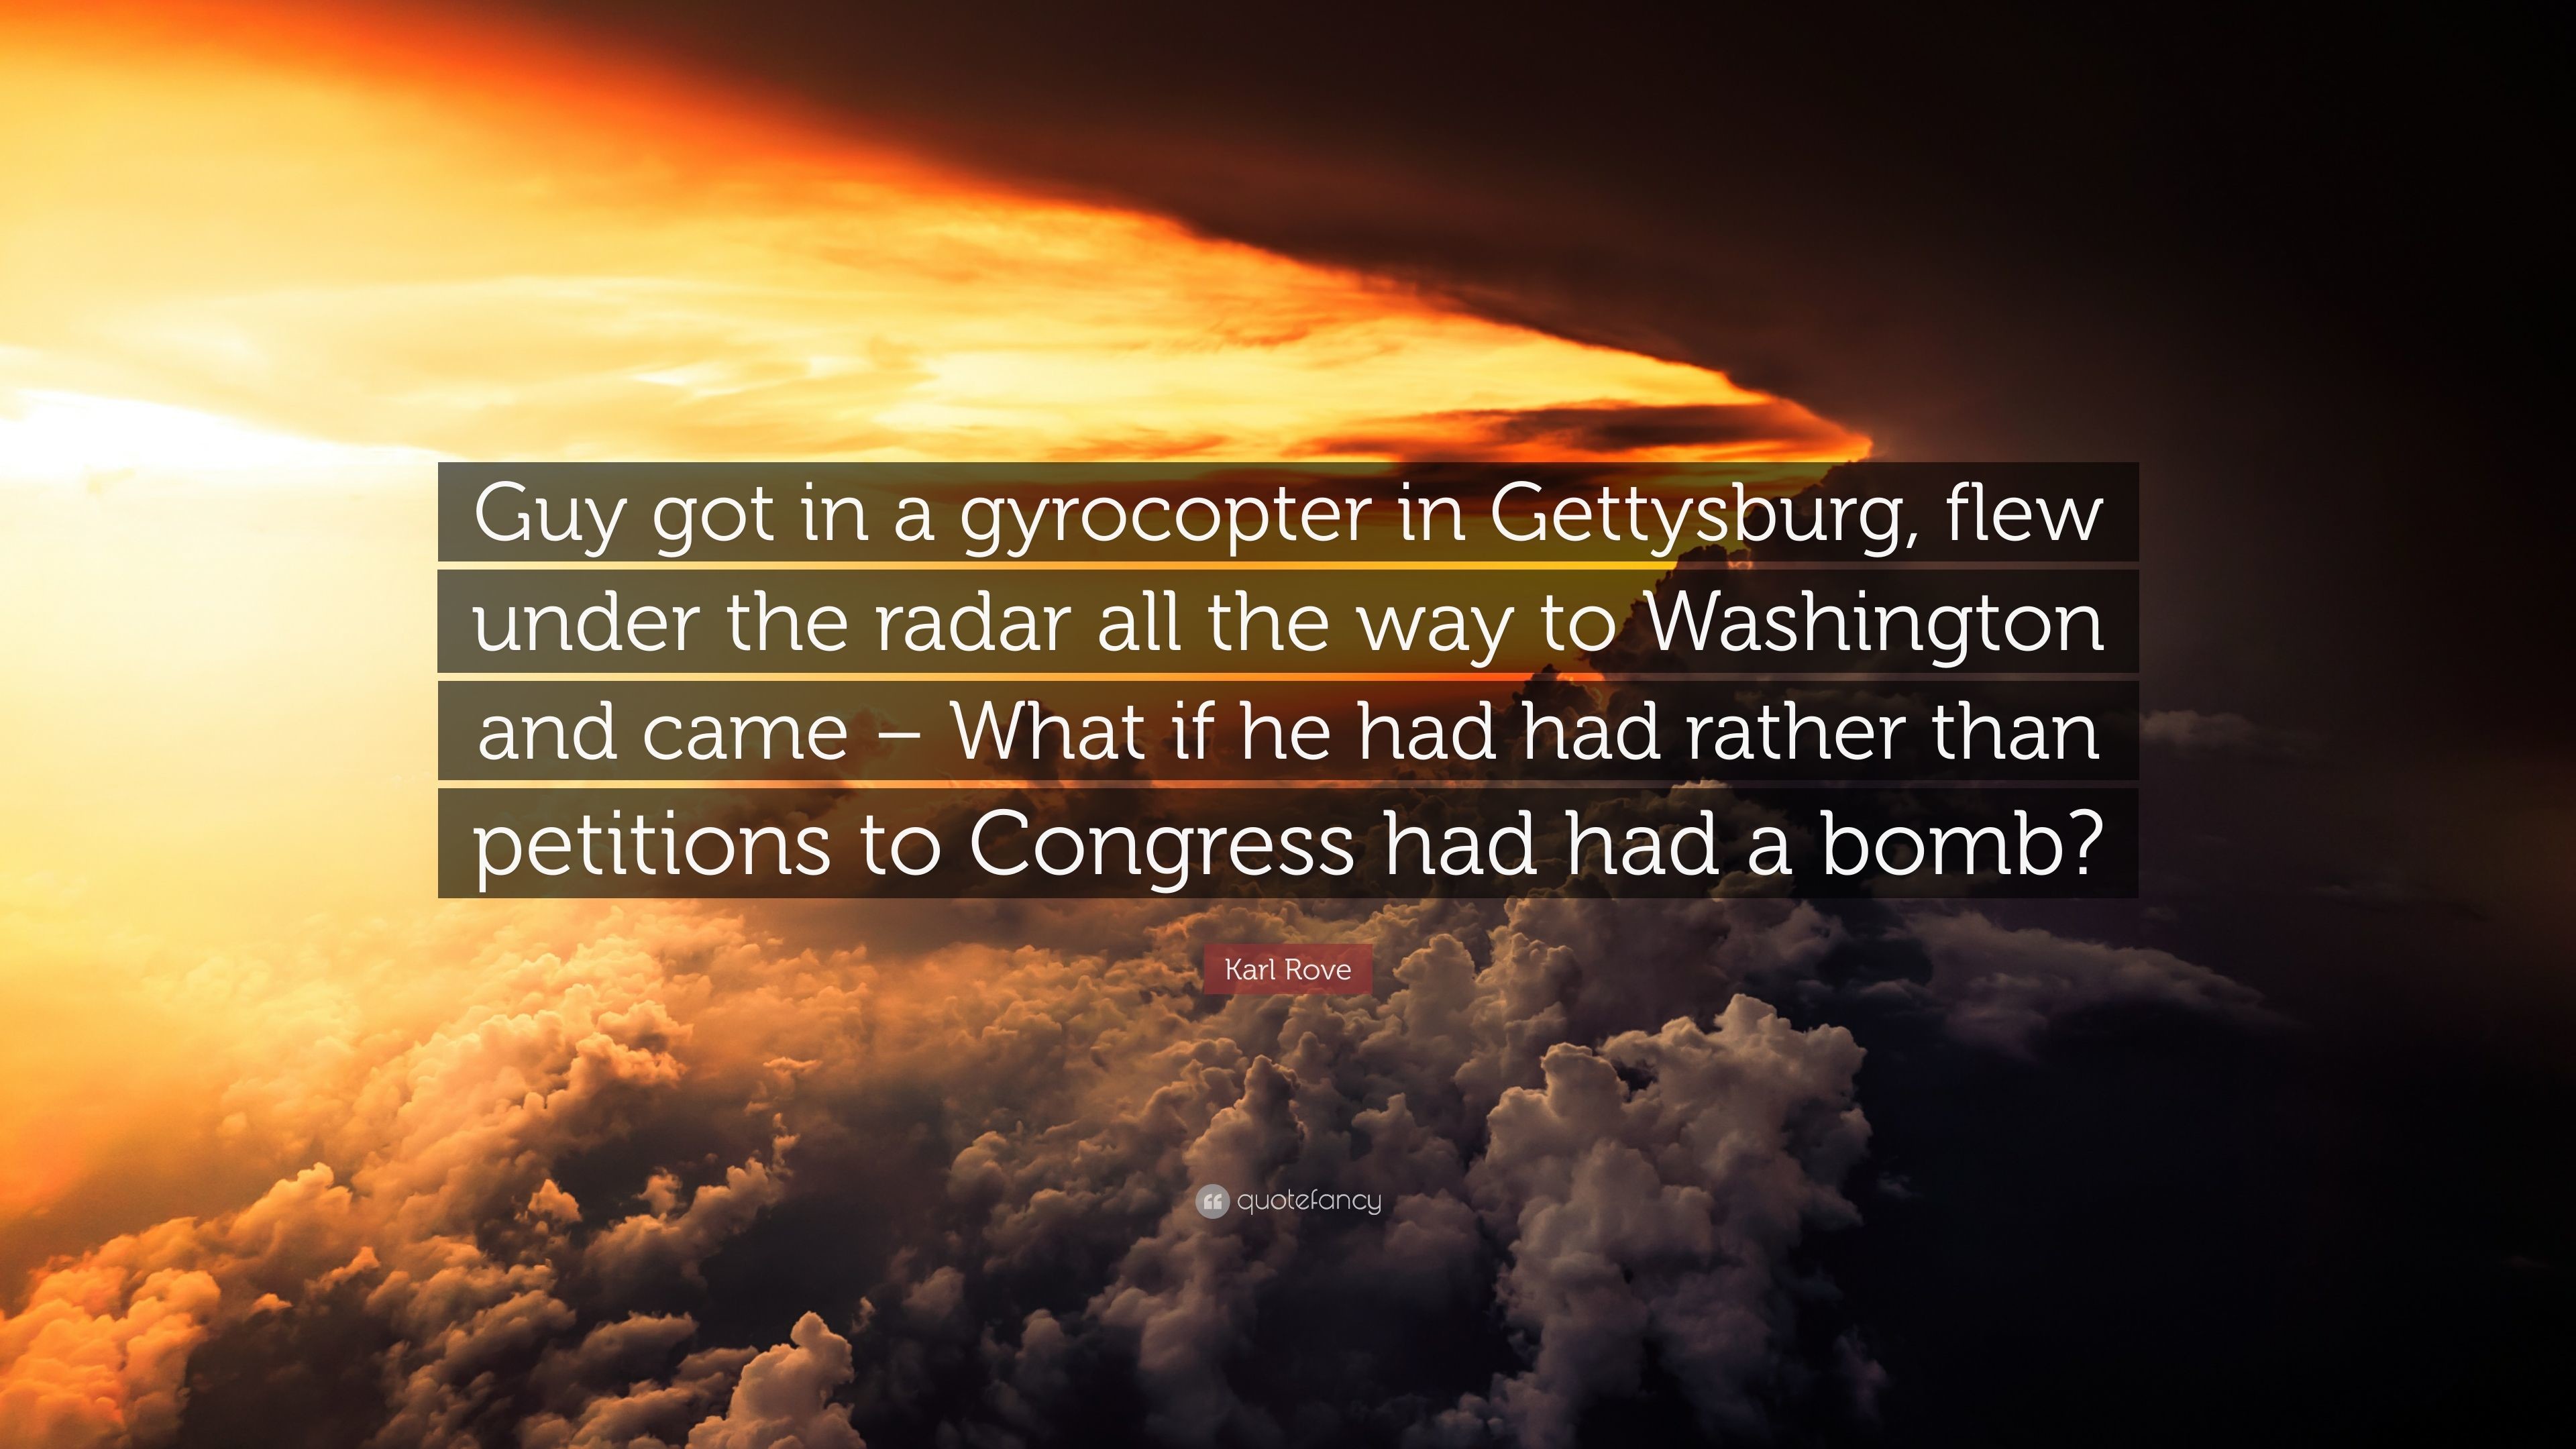 3840x2160 Karl Rove Quote: “Guy got in a gyrocopter in Gettysburg, flew under the